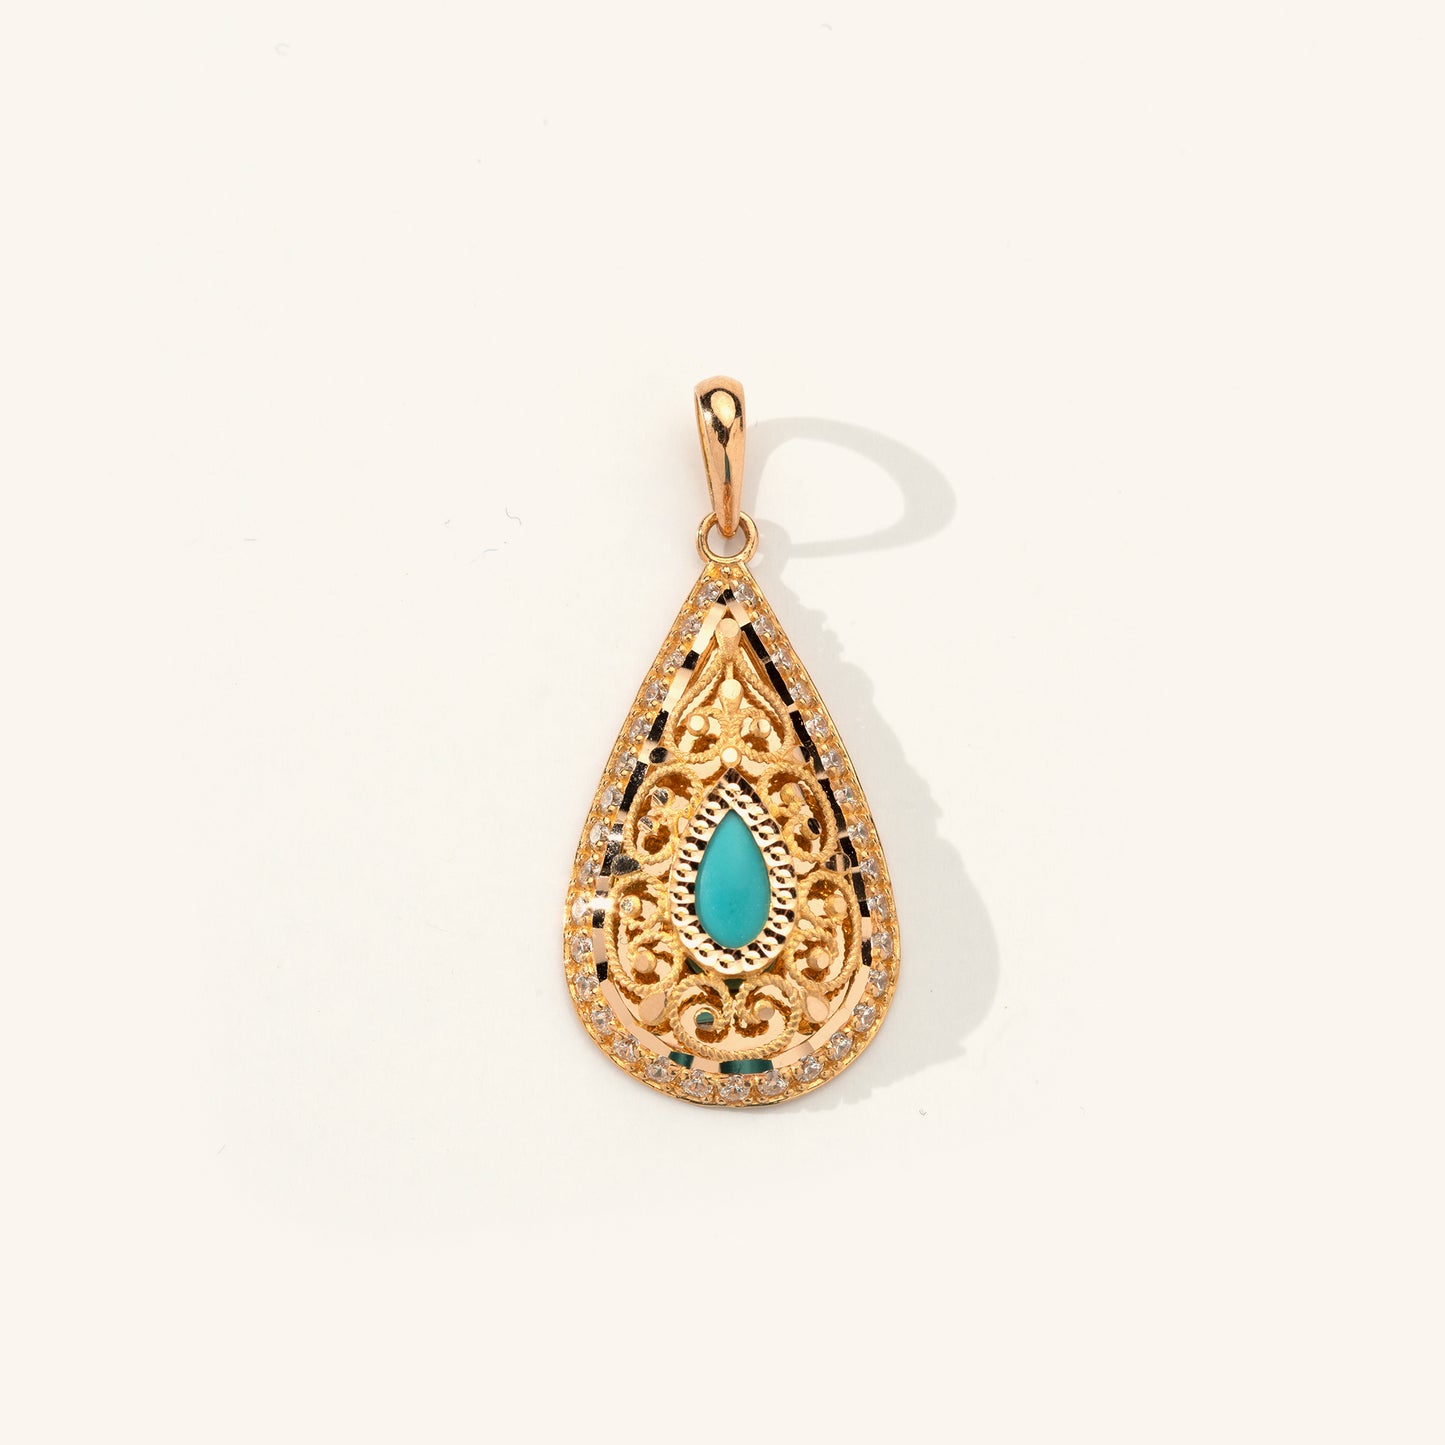 21k Pendent - Turquoise